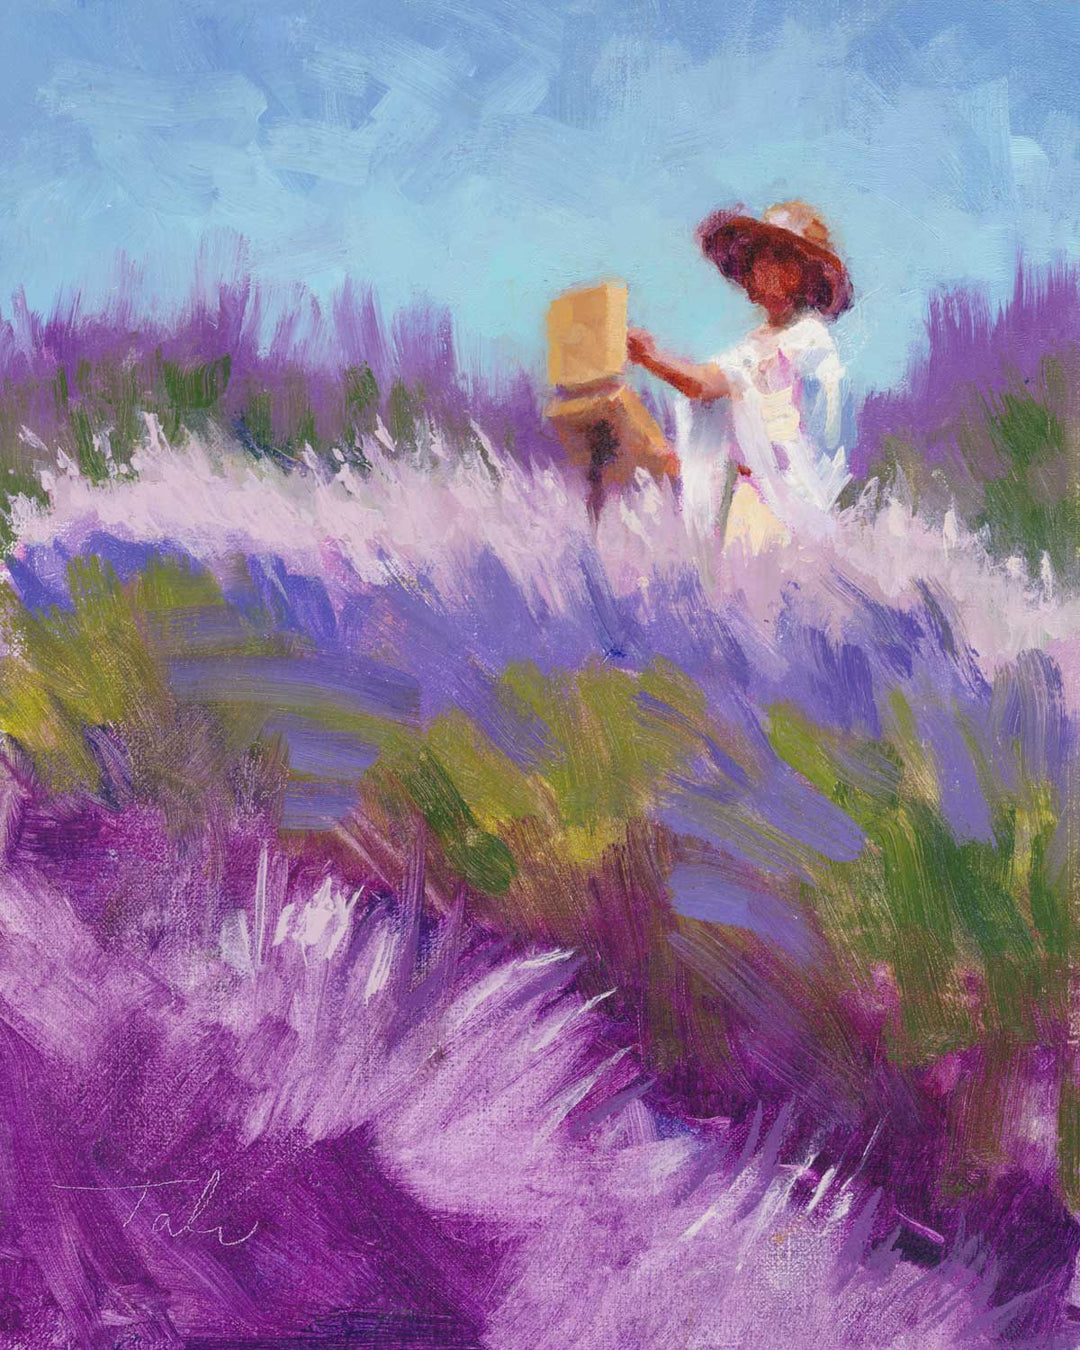 Her Muse: plein air woman oil painting lavender